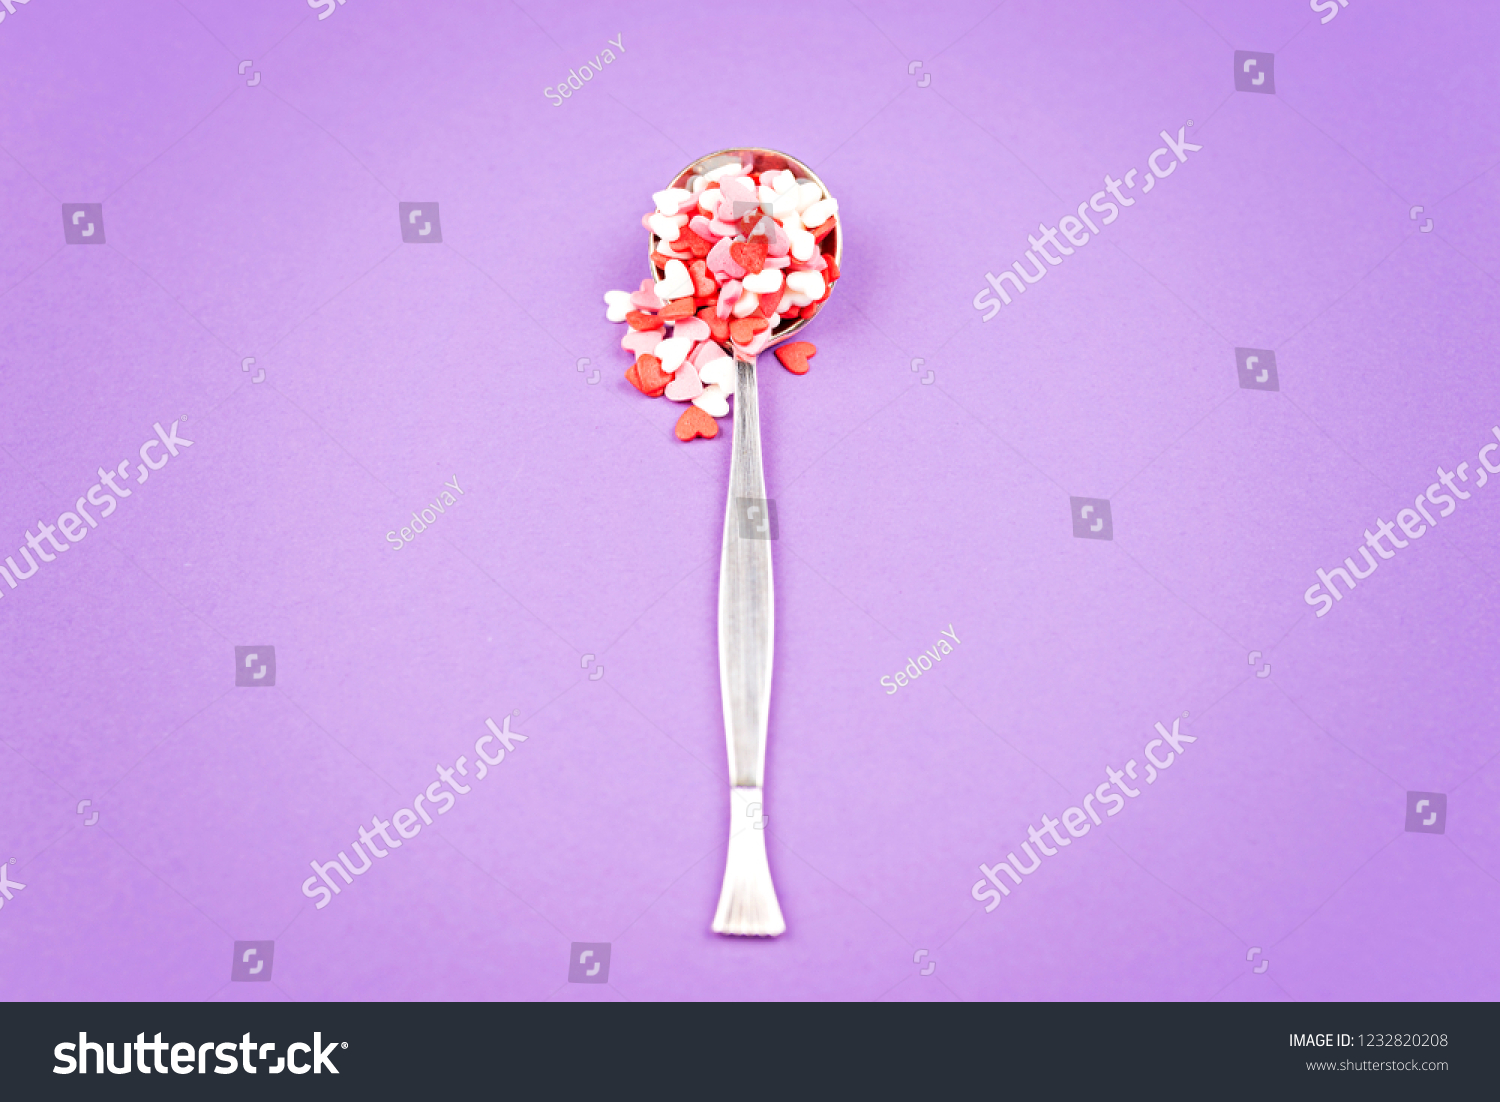 Vintage spoon with small pink, white, red sweet hearts on pastel Violet background. Flat lay stale. Valentine's Day celebration concept. Romantic mood. #1232820208